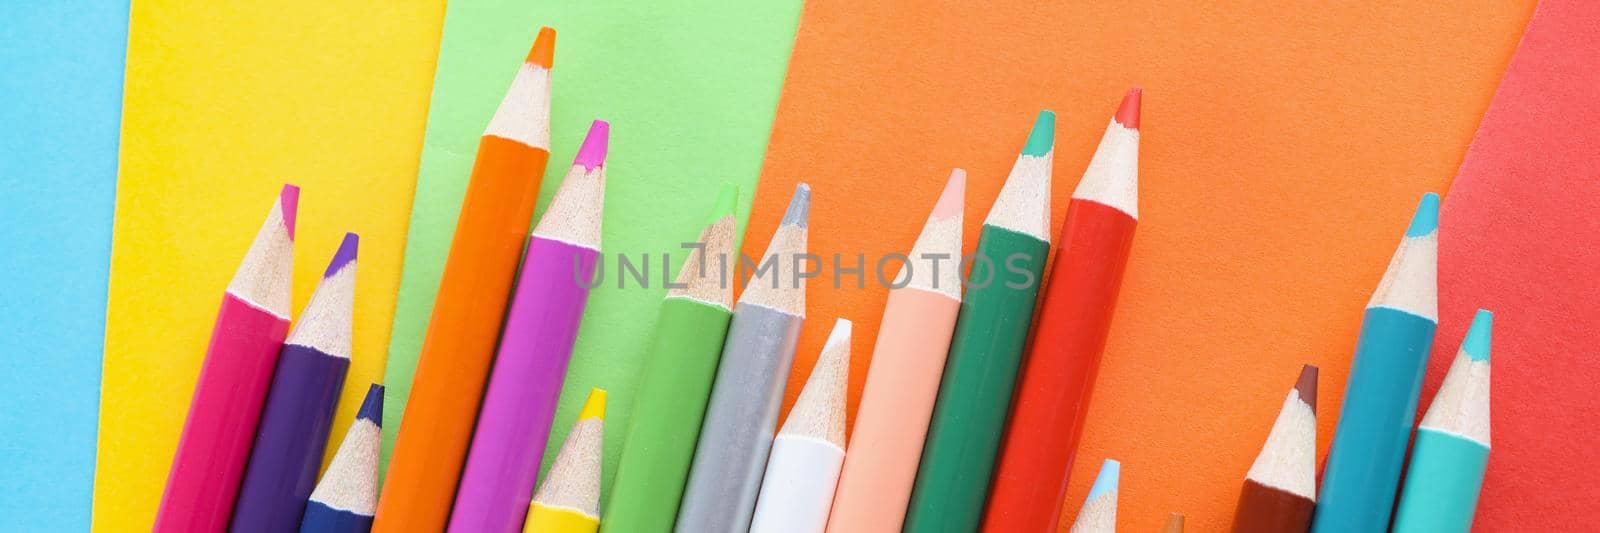 Top view of pencils collection chaotically placed on colored paper for childs art. Crayon ready to paint and create unique drawing. Creativity, art concept